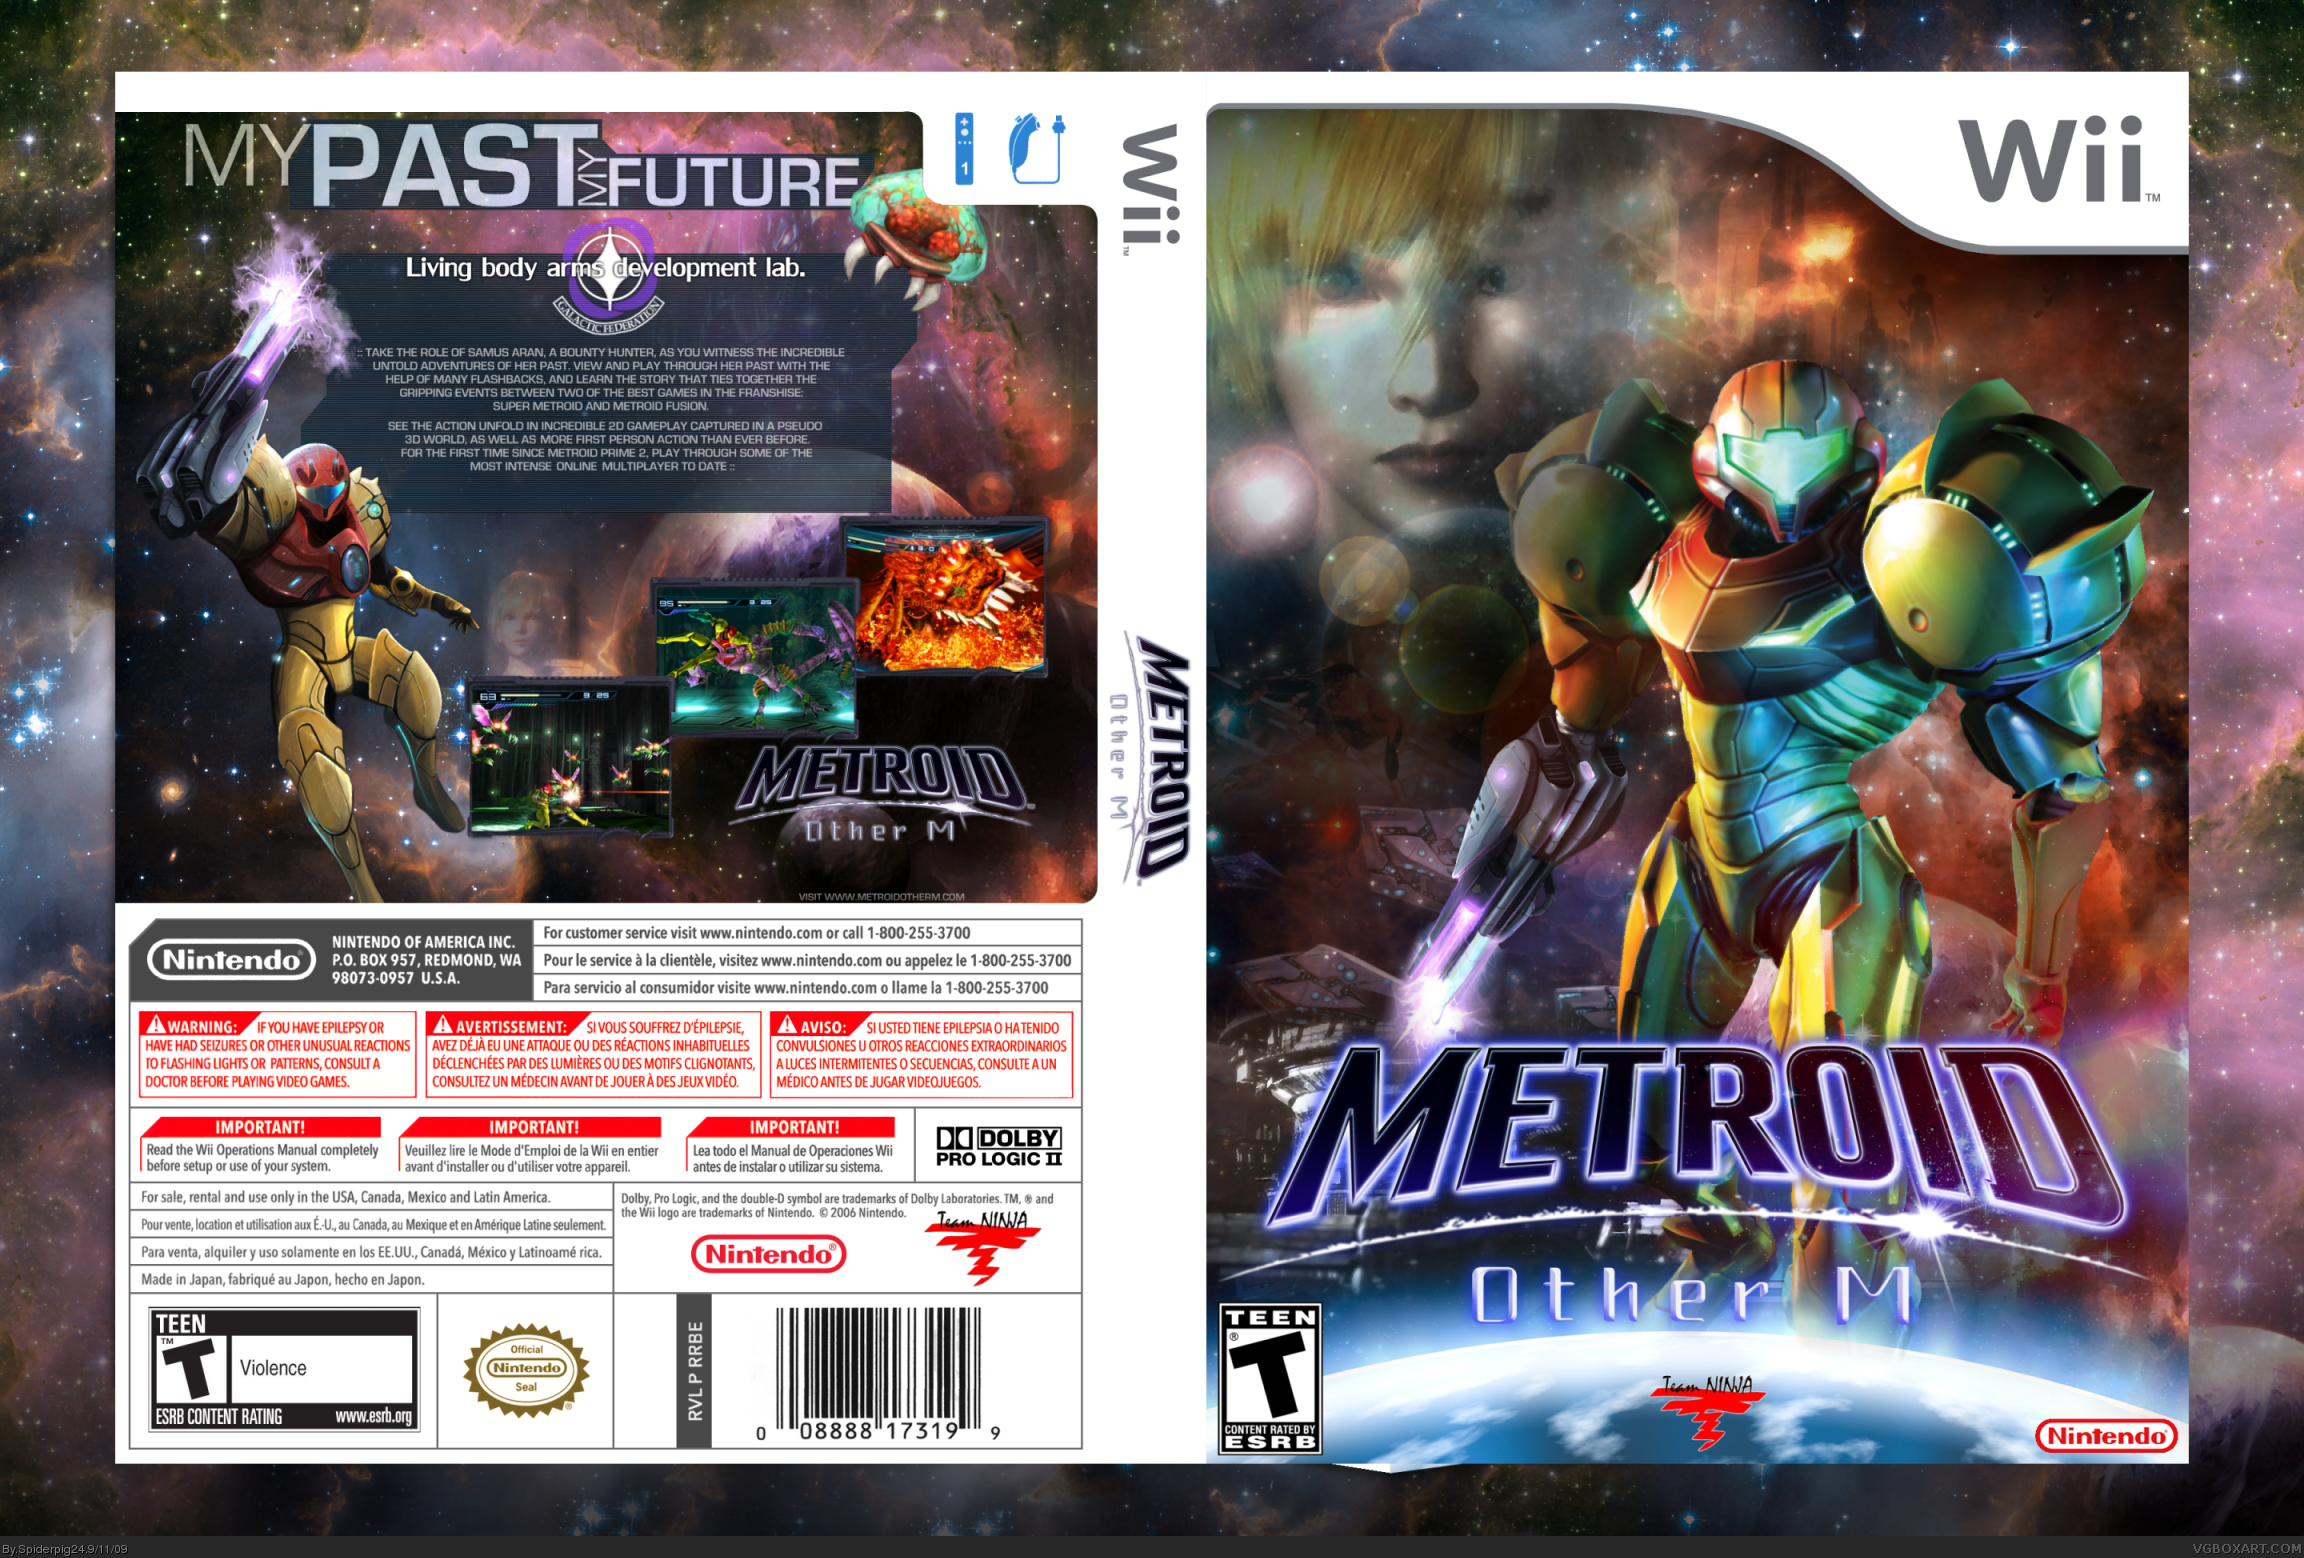 free download nintendo wii metroid other m